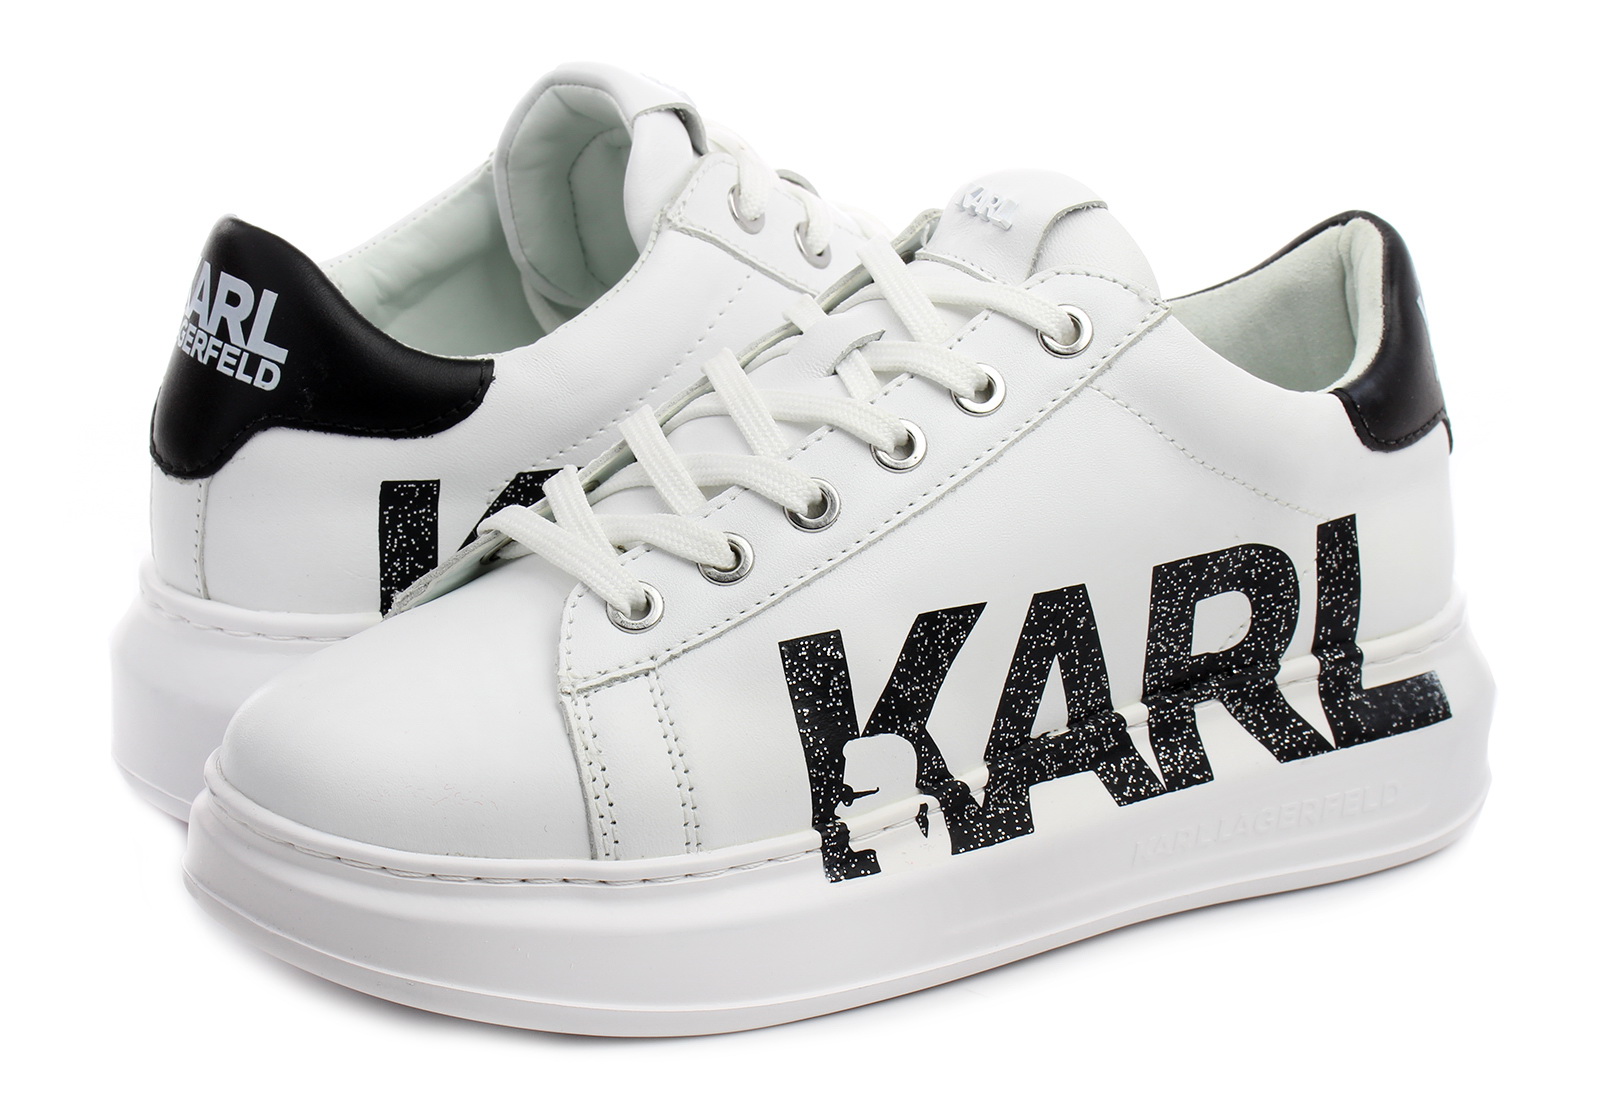 karl lagerfeld office shoes